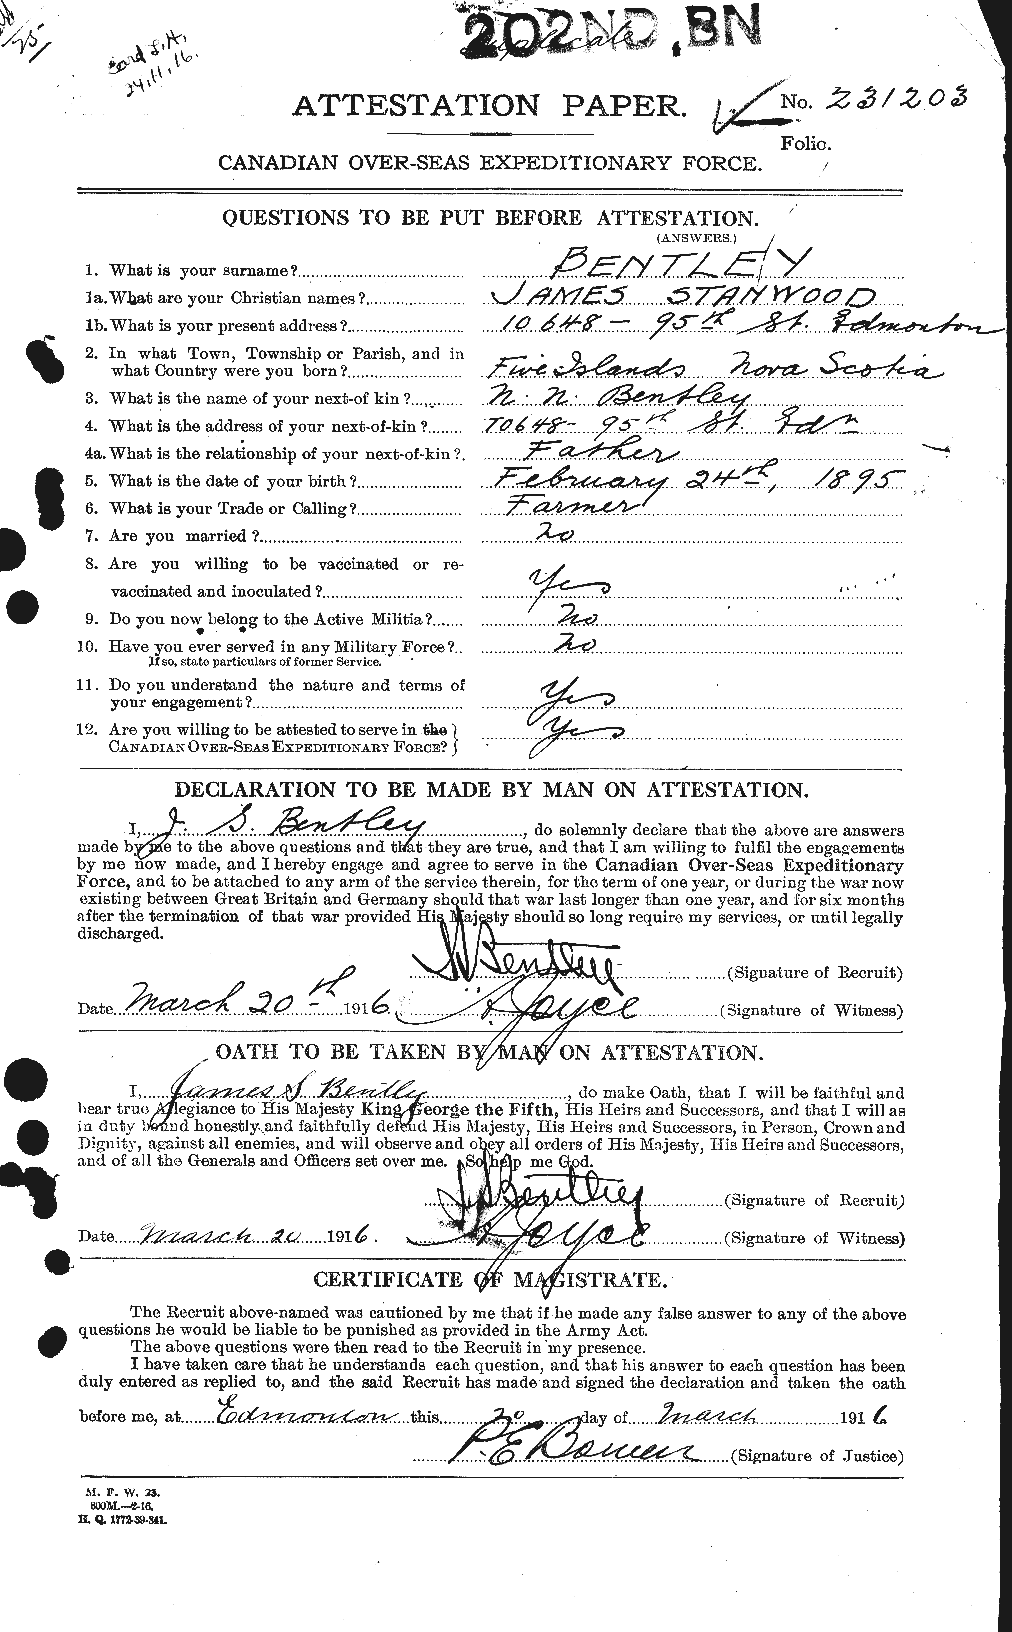 Personnel Records of the First World War - CEF 237888a